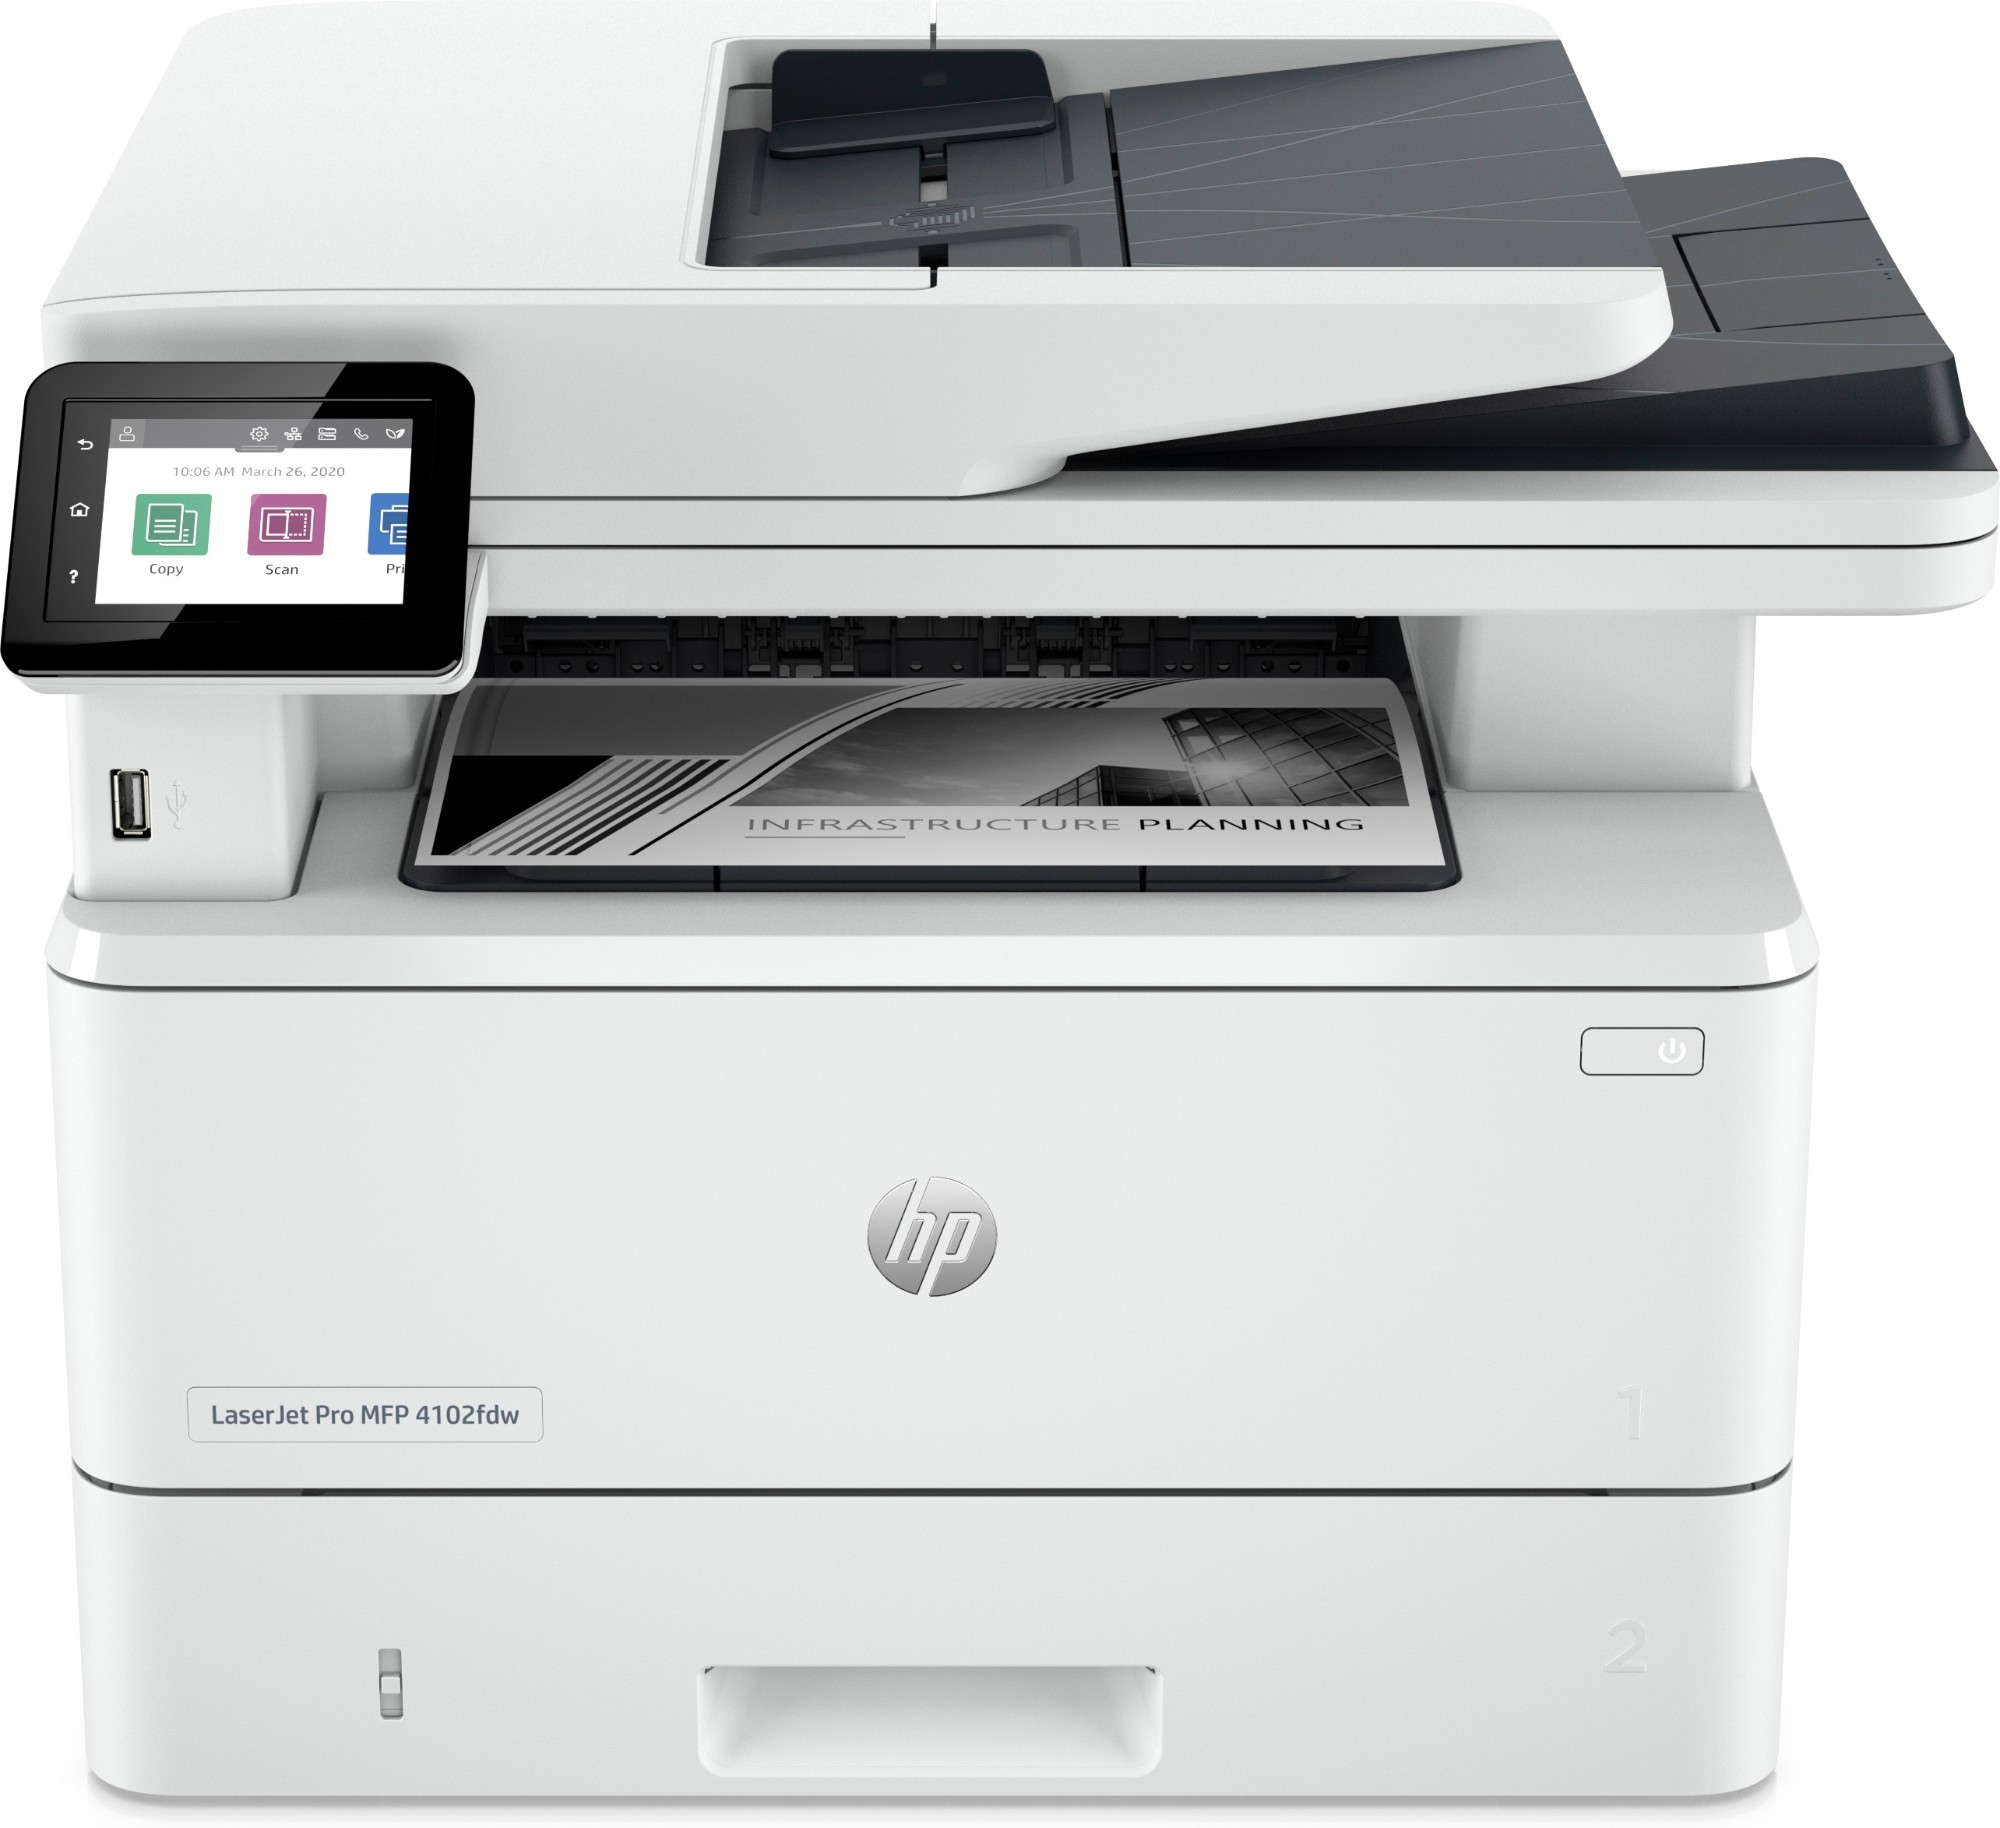 HP LaserJet Pro MFP 4102fdw Printer, Black and white, Printer for Small medium business, Print, copy, scan, fax, Wireless; Instant Ink eligible; Print from phone or tablet; Automatic document feeder